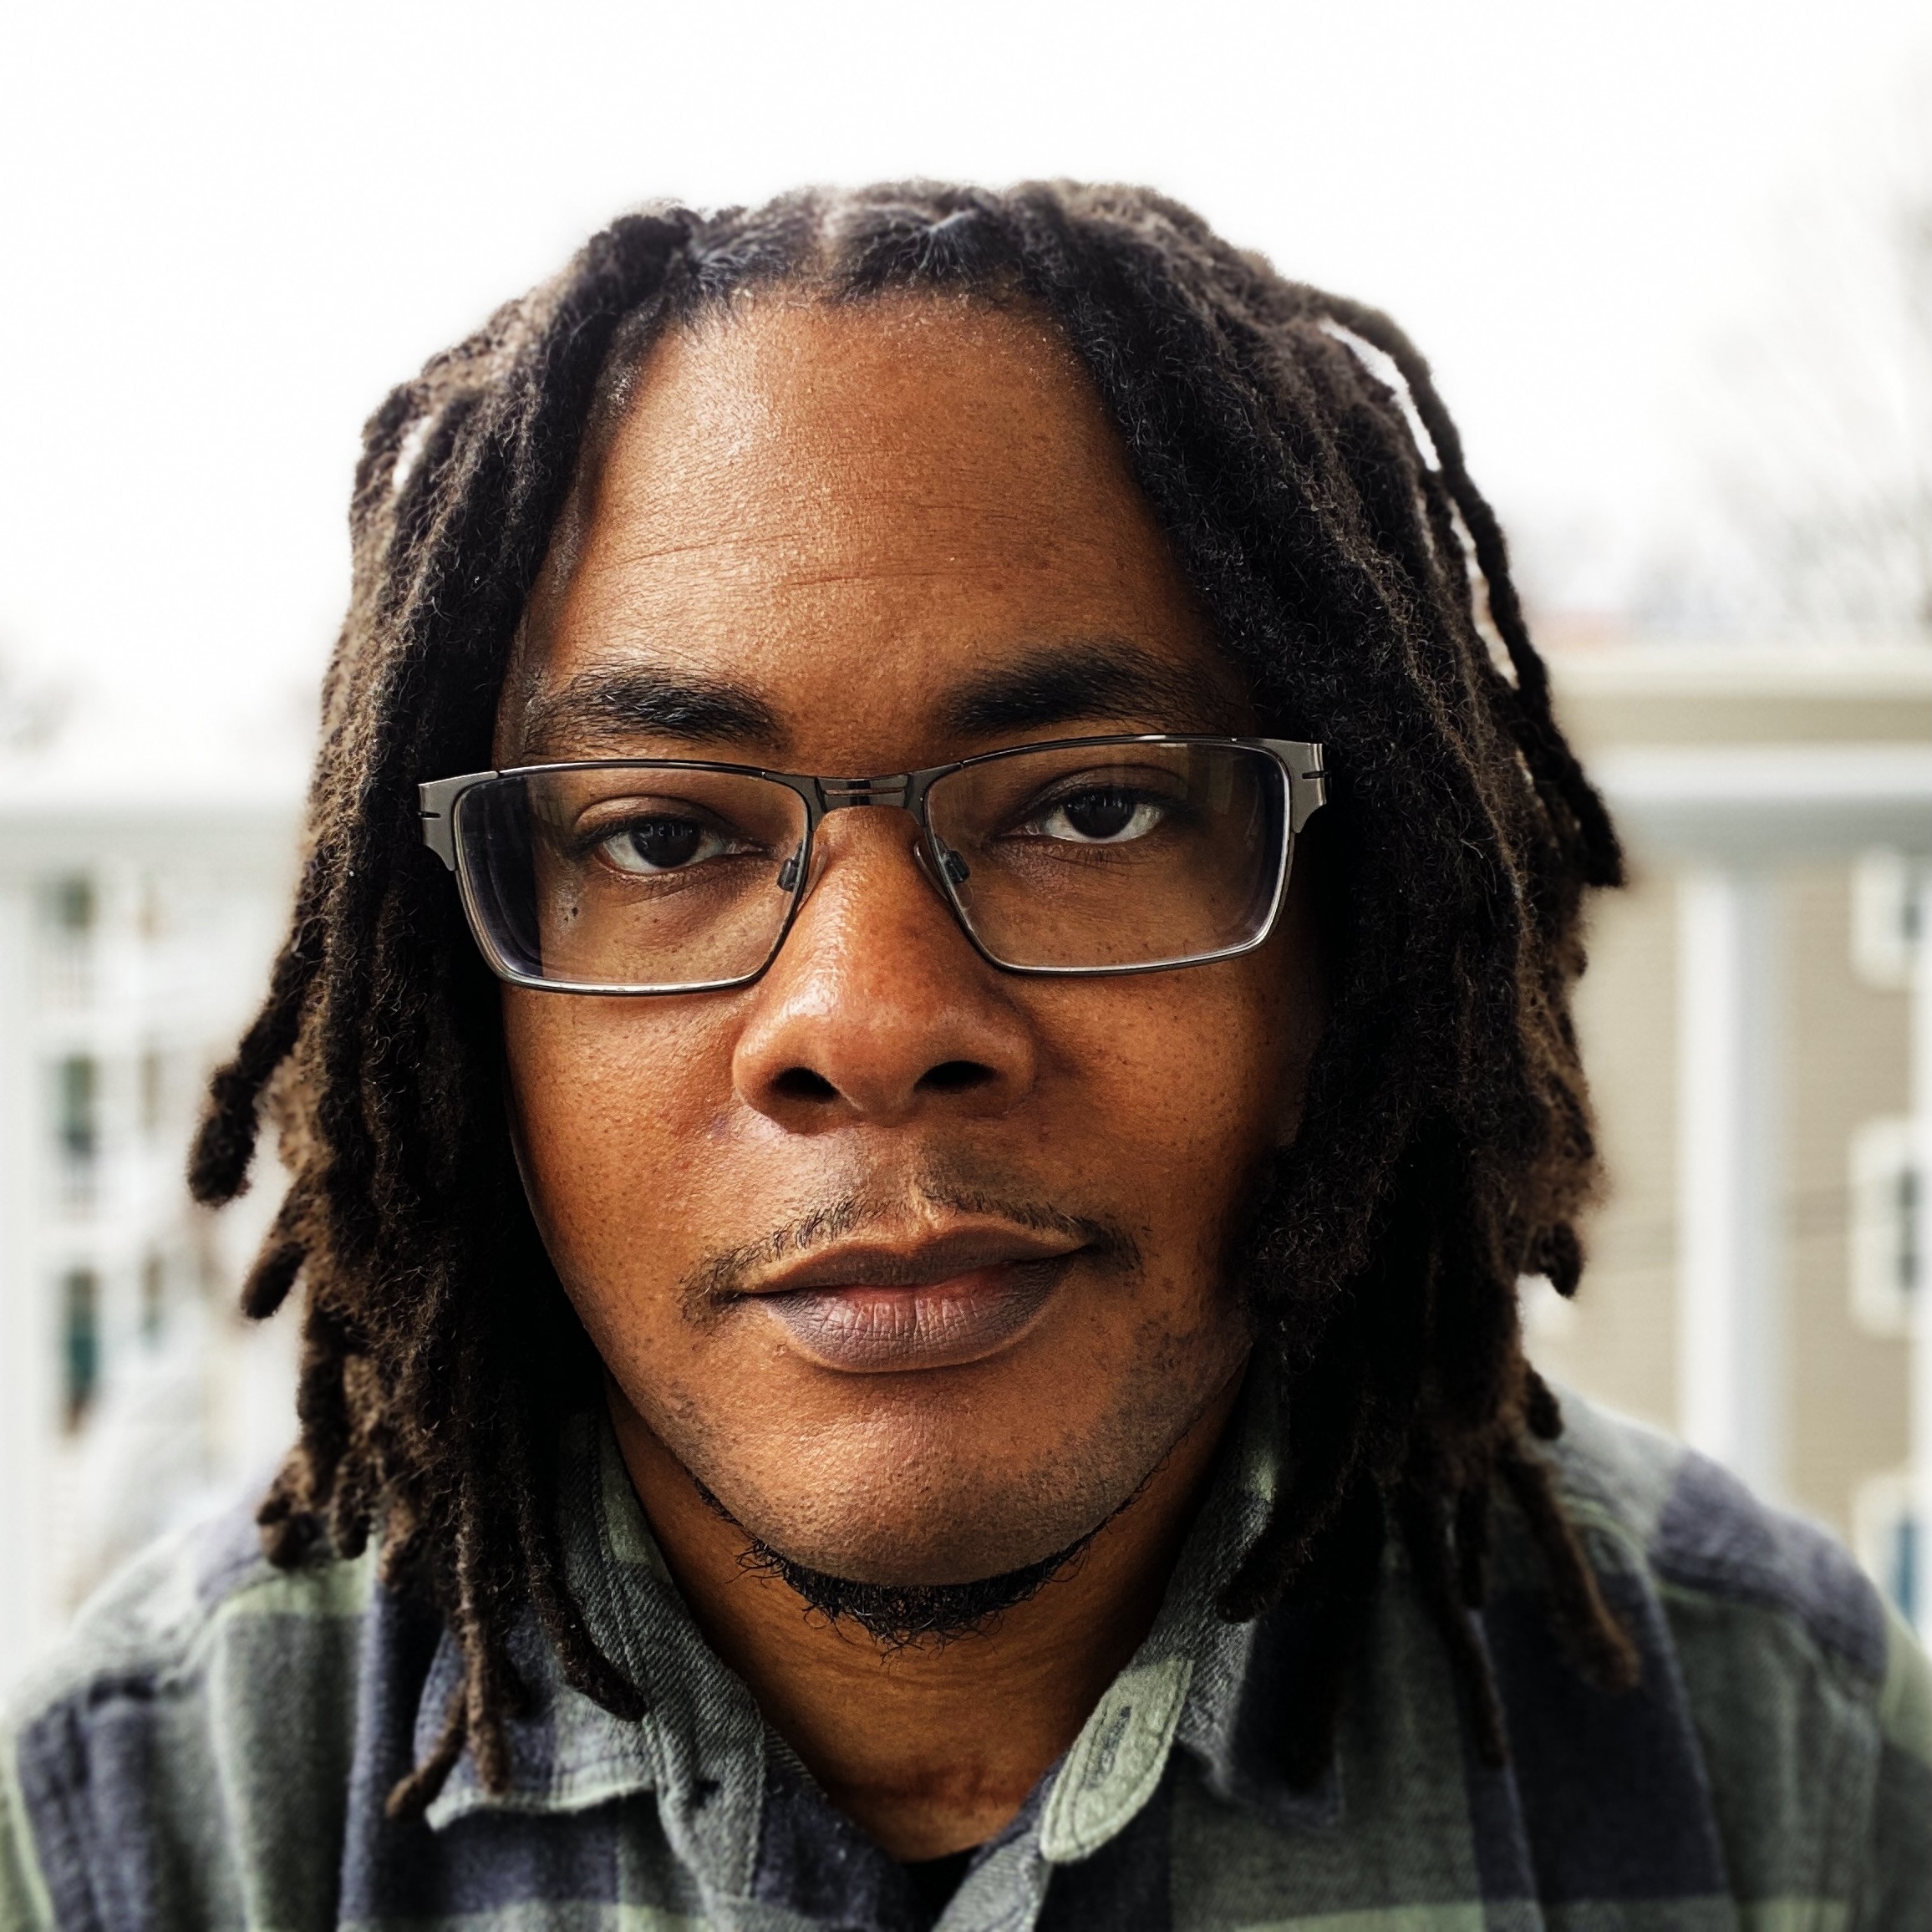 A smiling Black American man with long locs, glasses, and a button down shirt